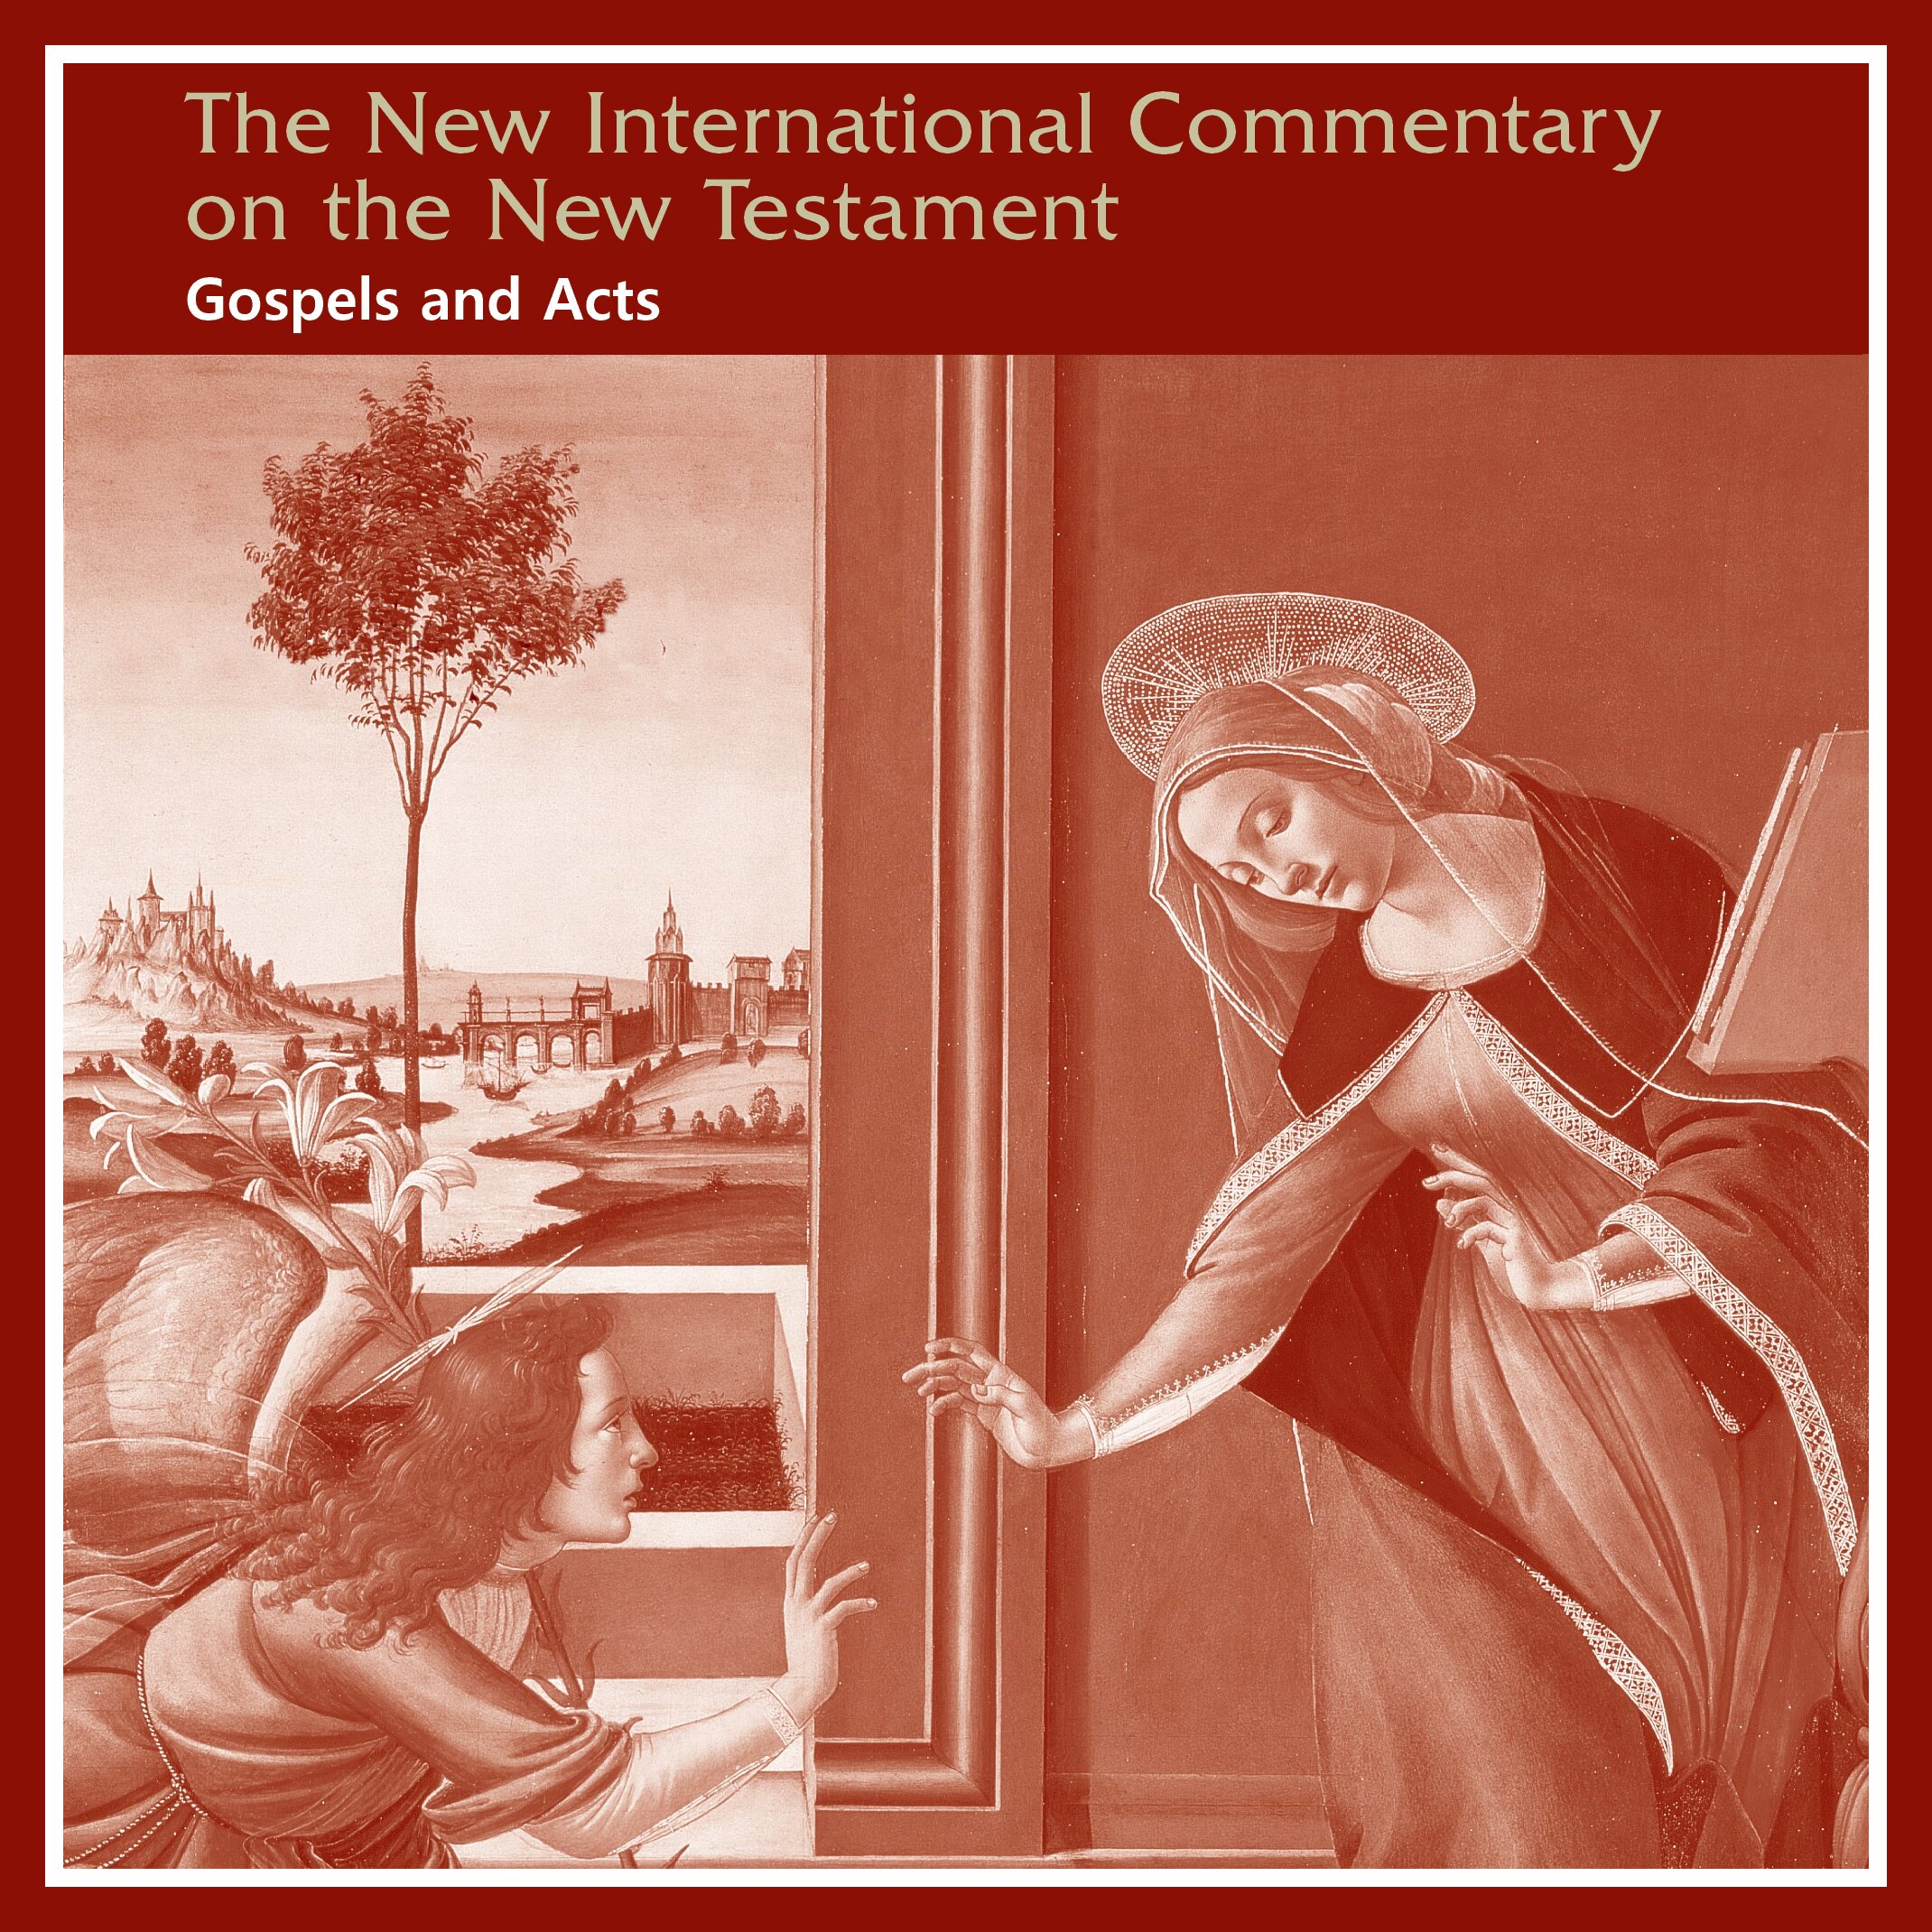 Gospels and Acts, 5 vols. (New International Commentary on the New Testament | NICNT)